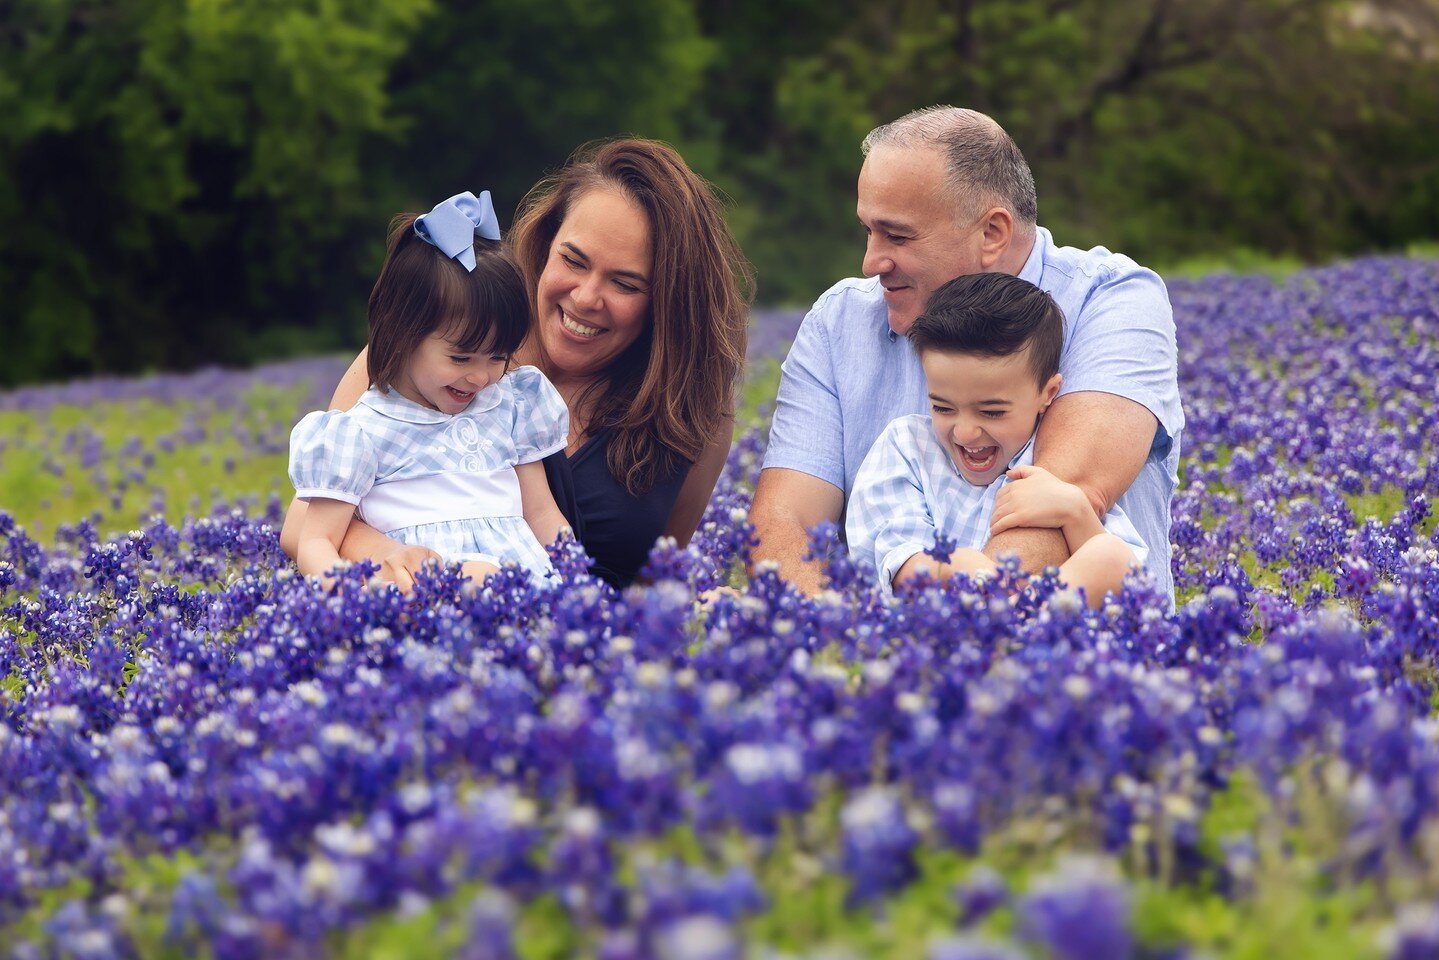 Look at this gorgeous family in the most lush bluebonnet field!  This was taken just this morning.  There are still spots available for you to grab so you don't miss out on this years amazing blooms.

#bluebonnetminisessions #bluebonnets #dallasfamil